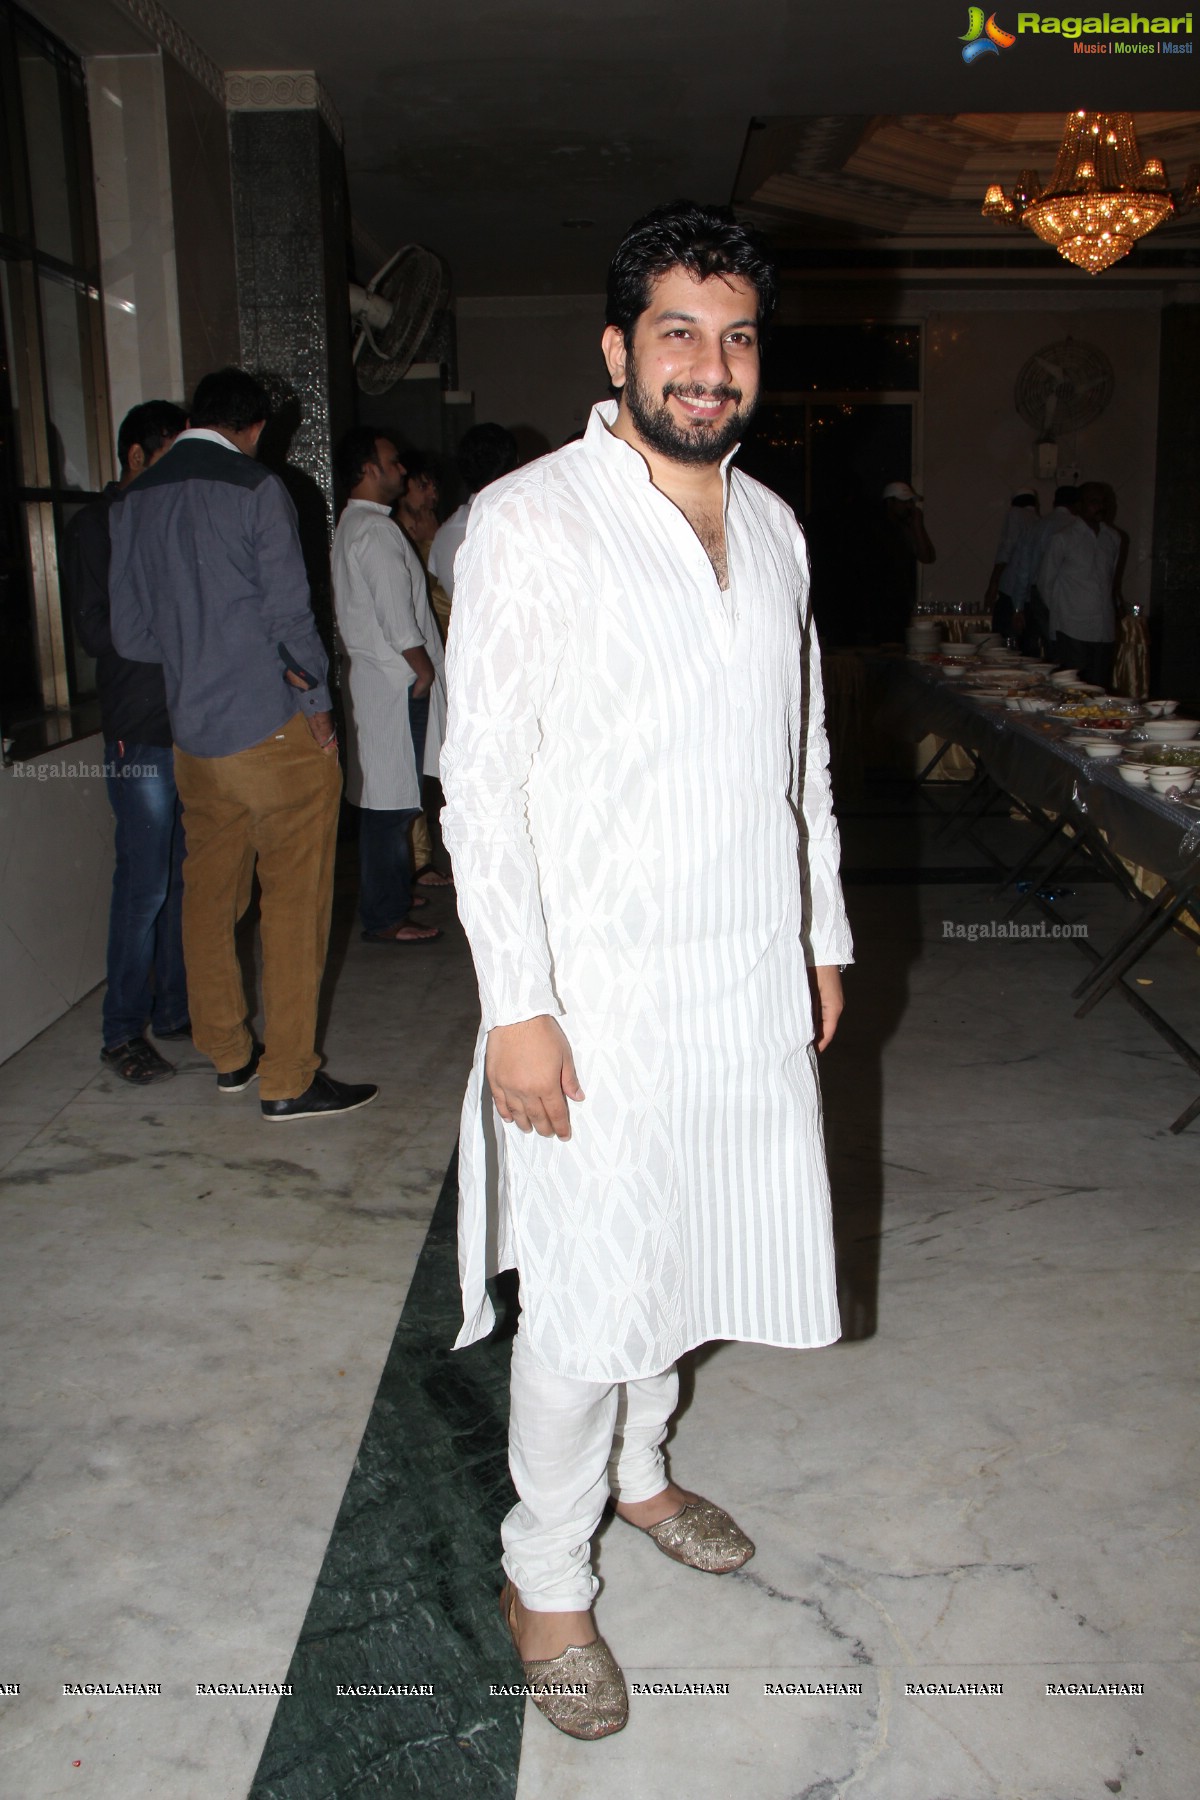 Iftar Party 2014 by Mr. N. Md. Farooq (Ex Minister)